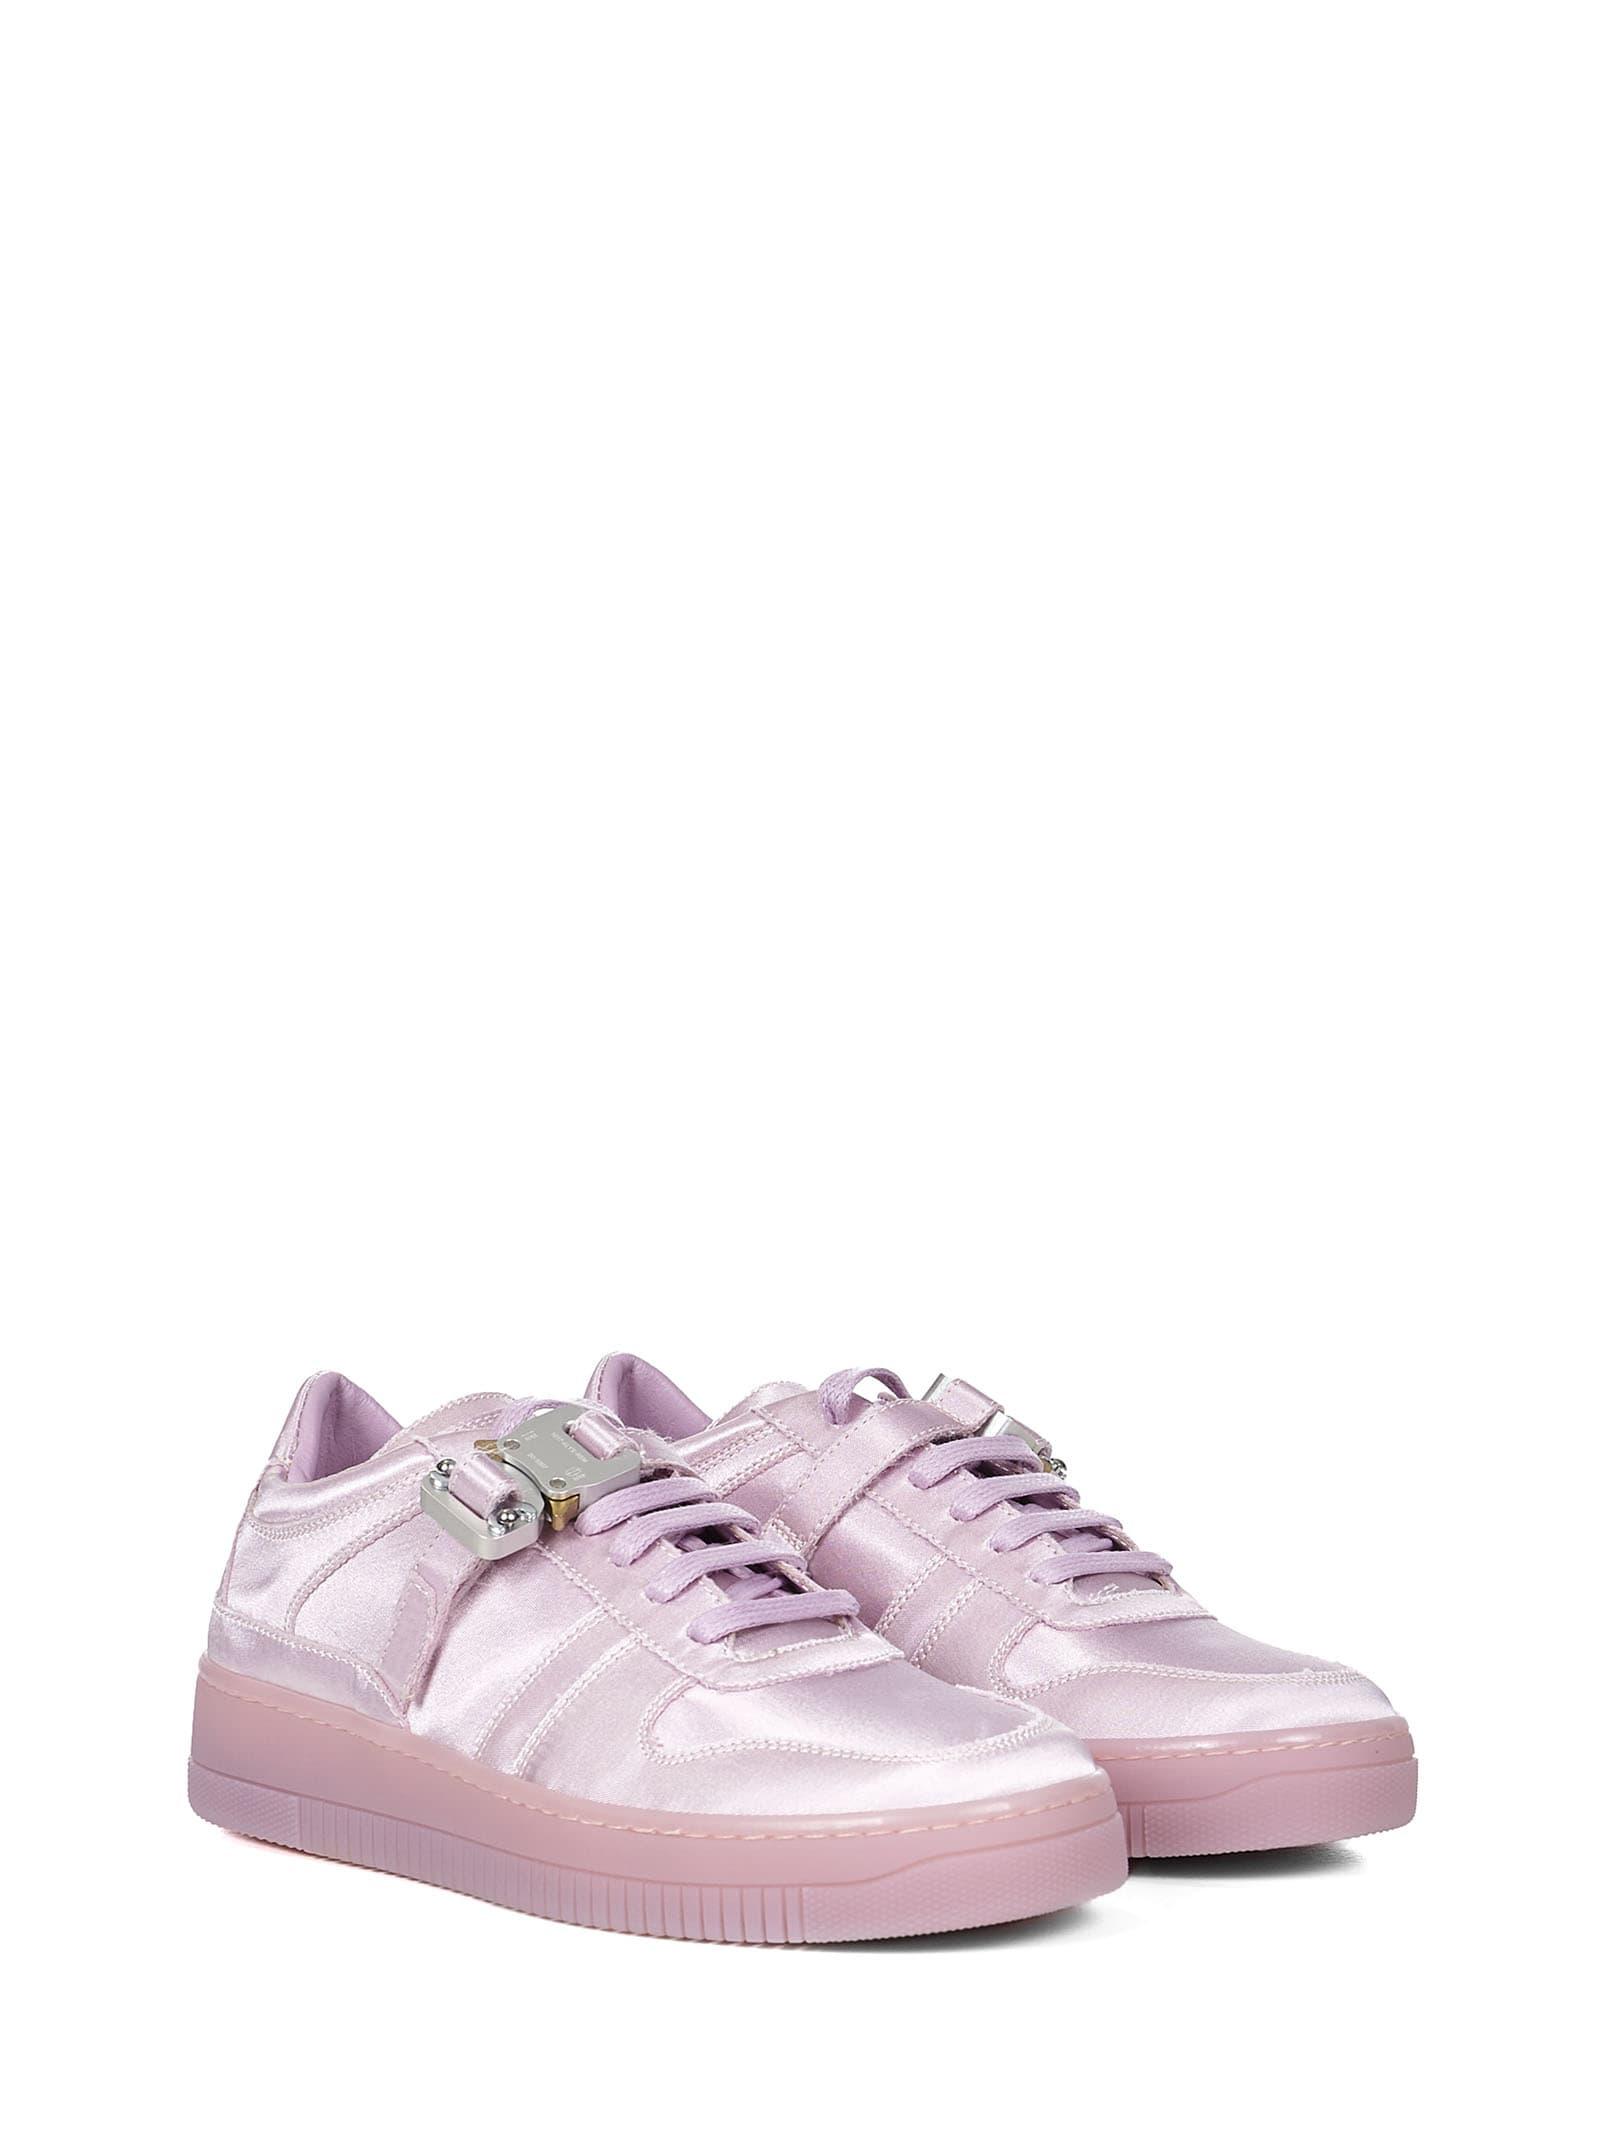 1017 ALYX 9SM Alyx Sneakers Pink for Men | Lyst